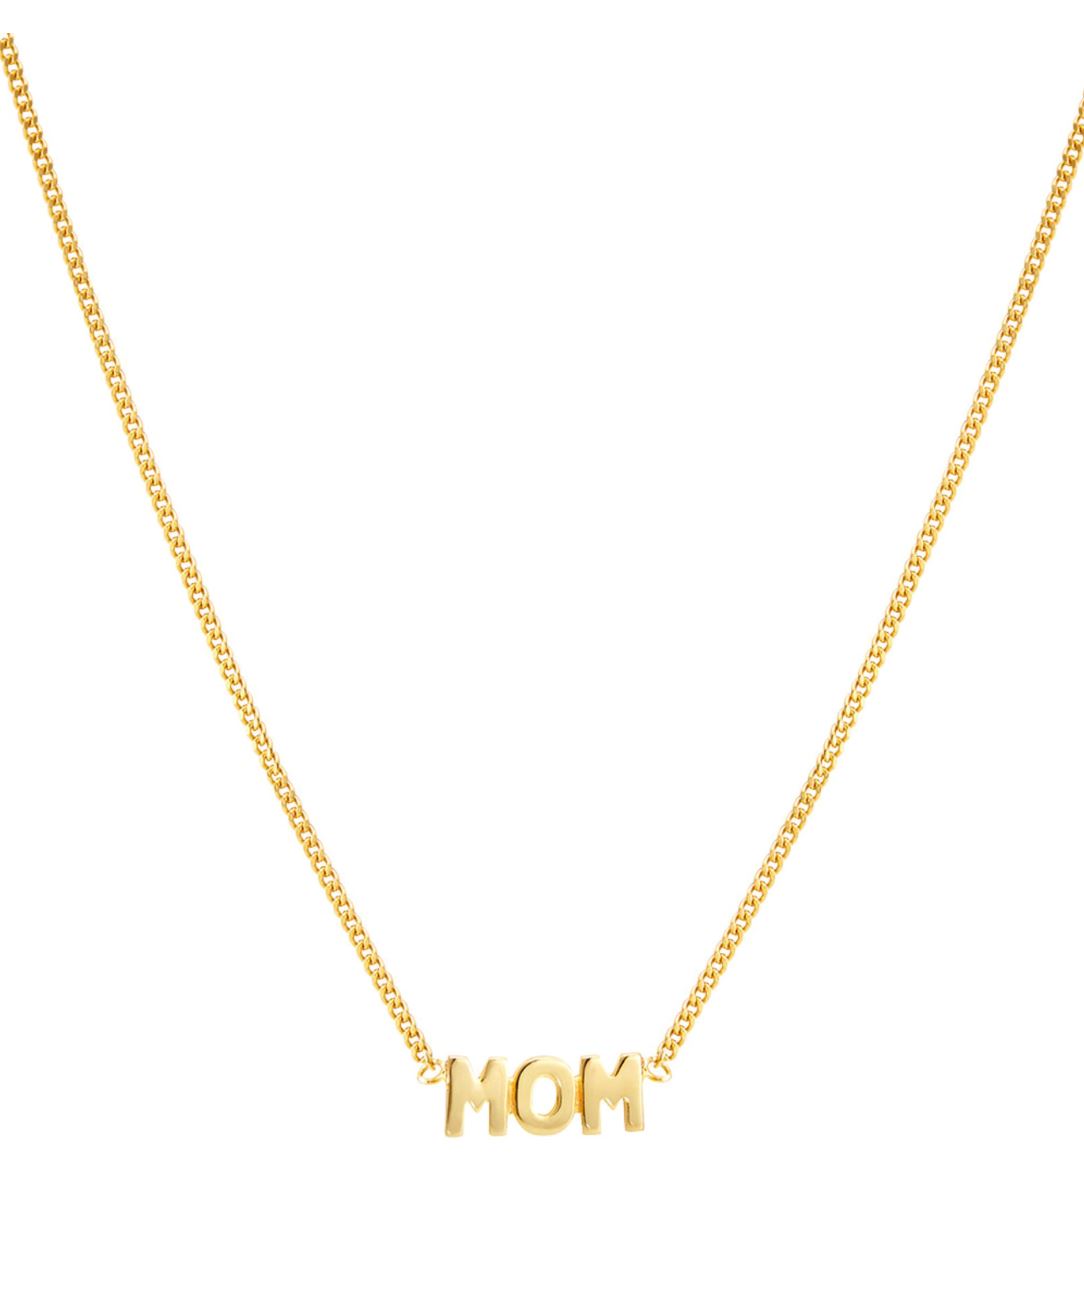 MOM NECKLACE 55 CM IN GOLD NECKLACE MARIA BLACK 